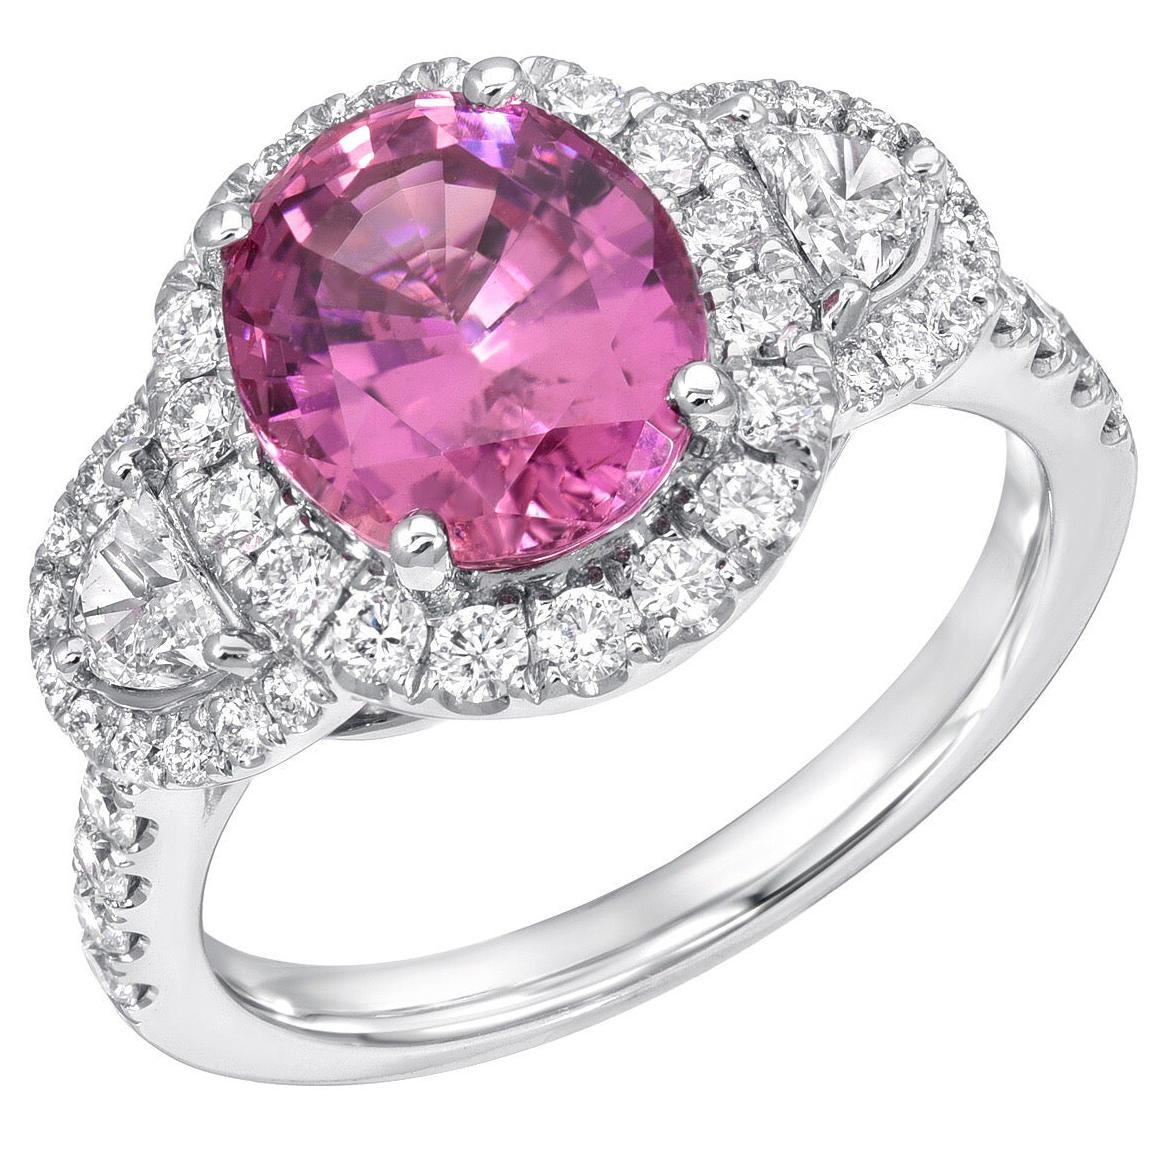 Pink Sapphire Ring Oval 3.14 Carats